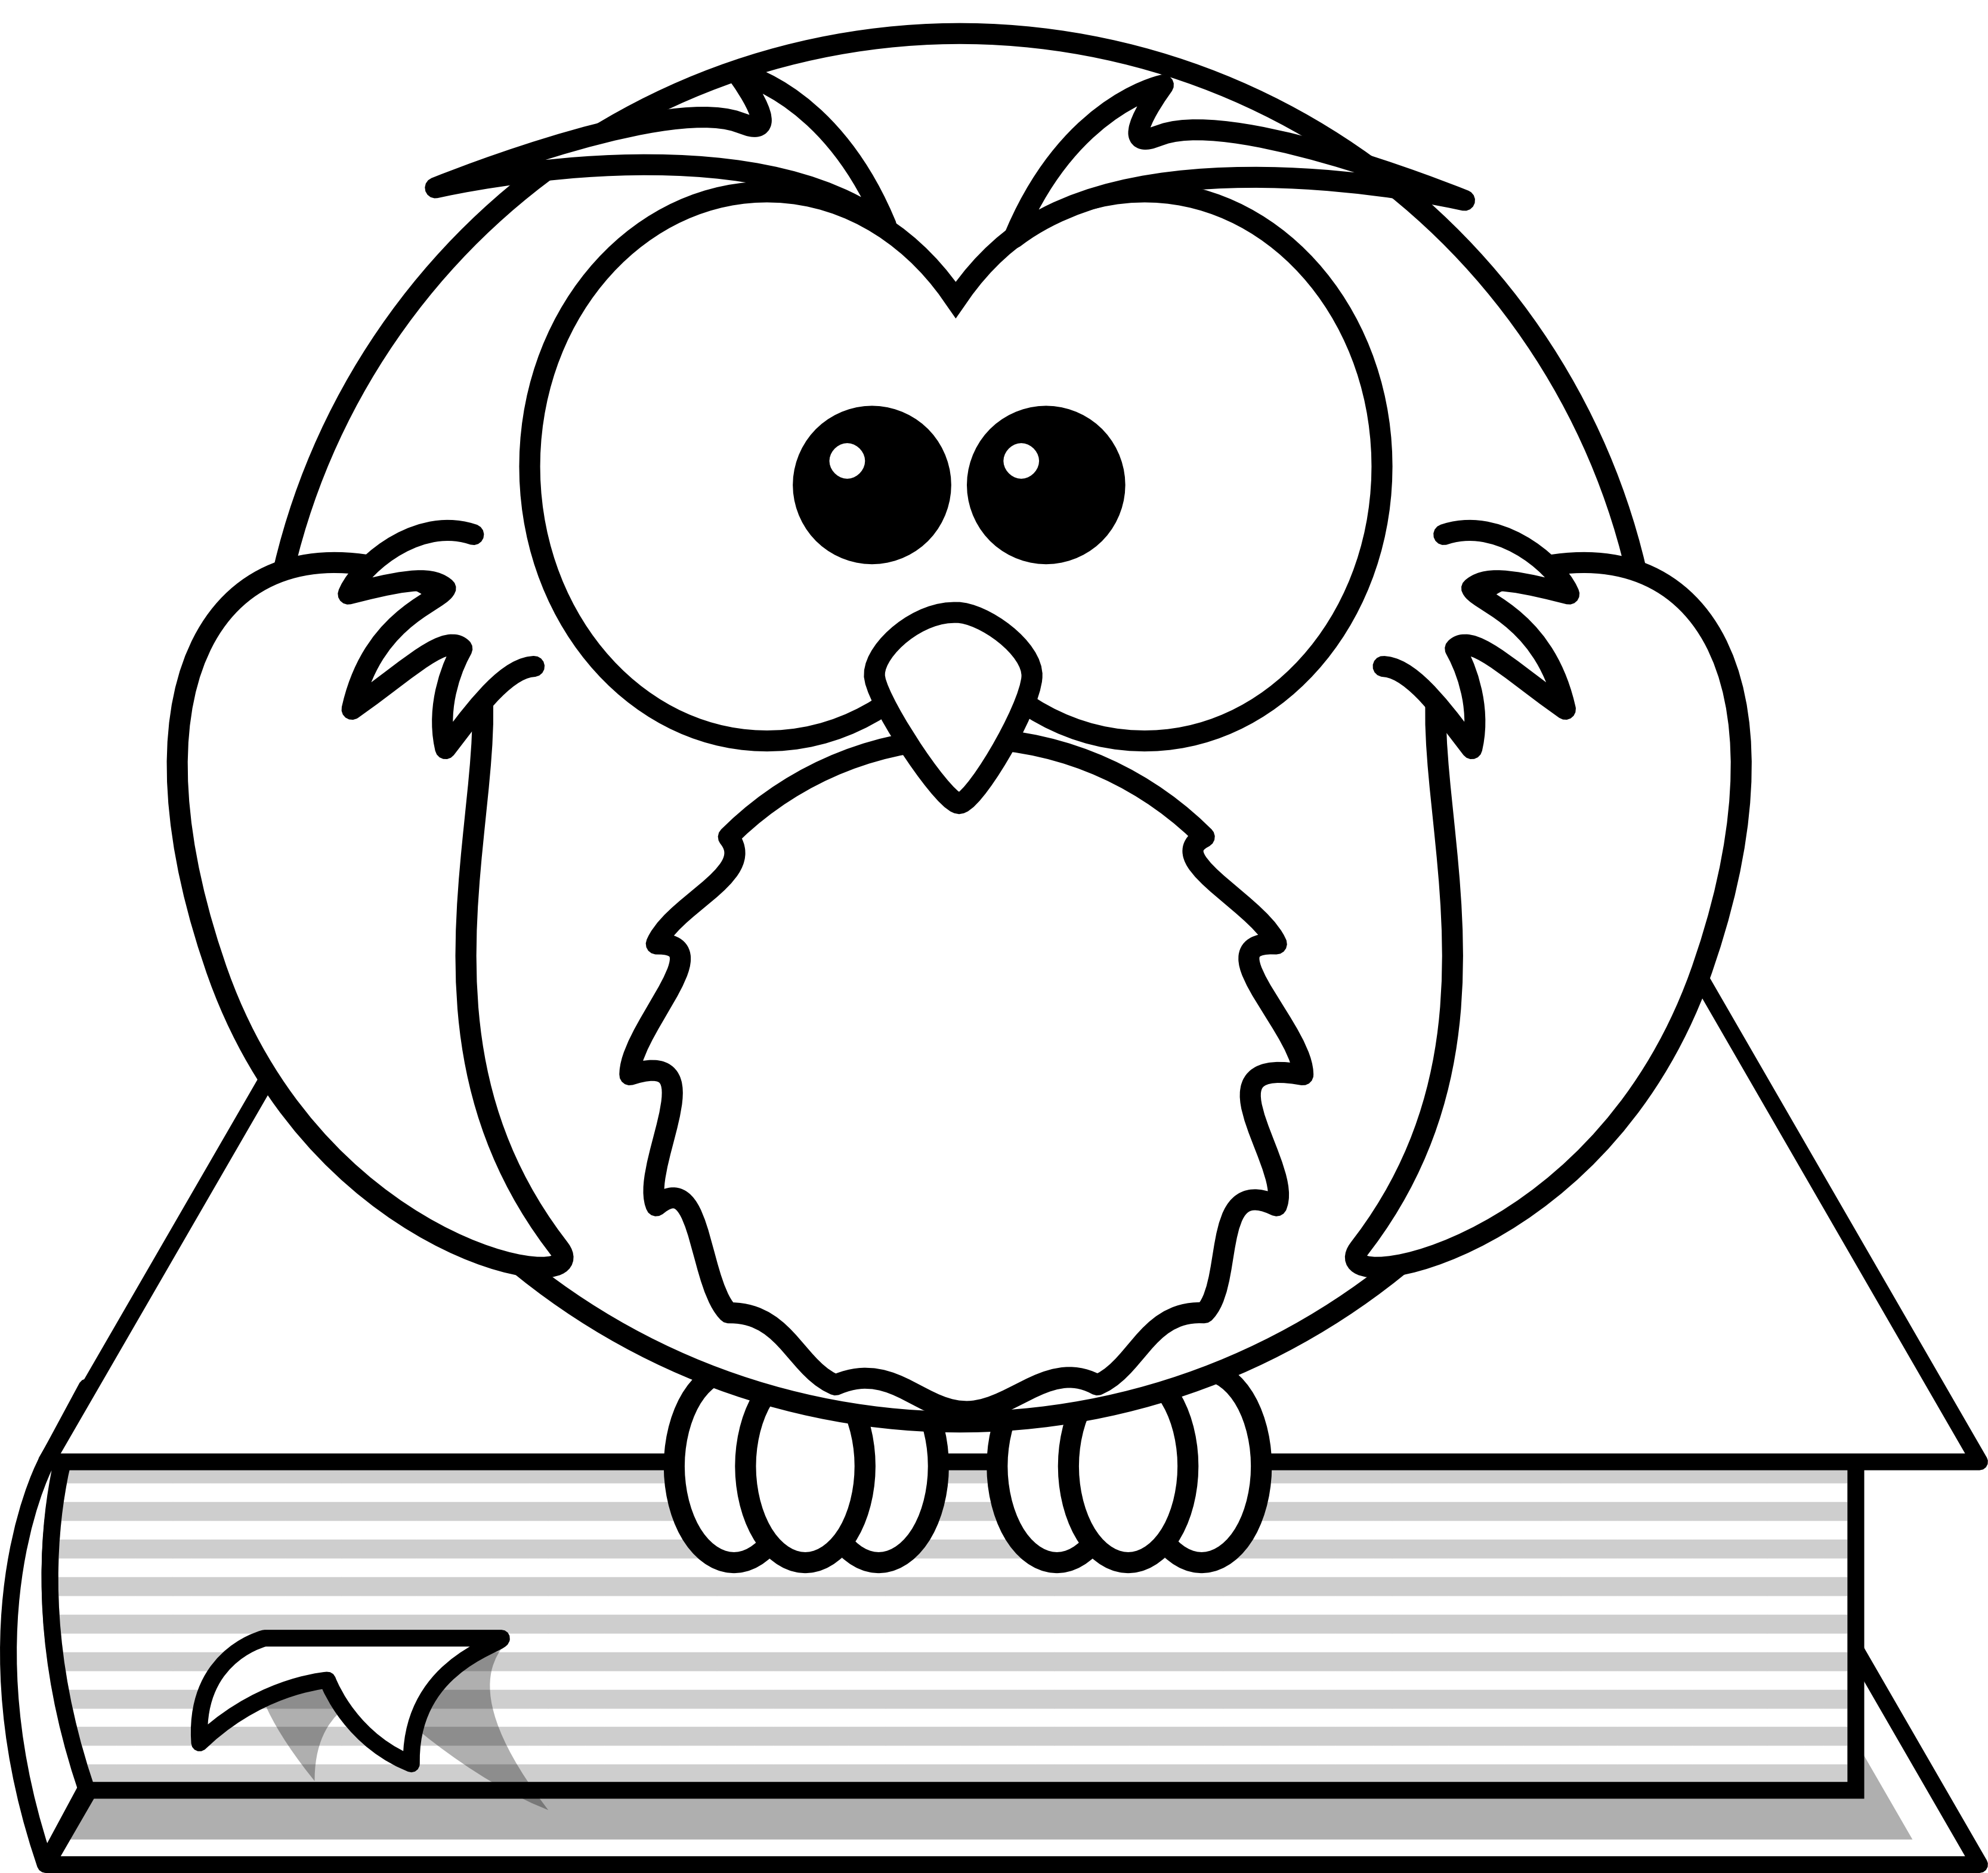 Cartoon Owl Pictures Black And White Images  Pictures - Becuo